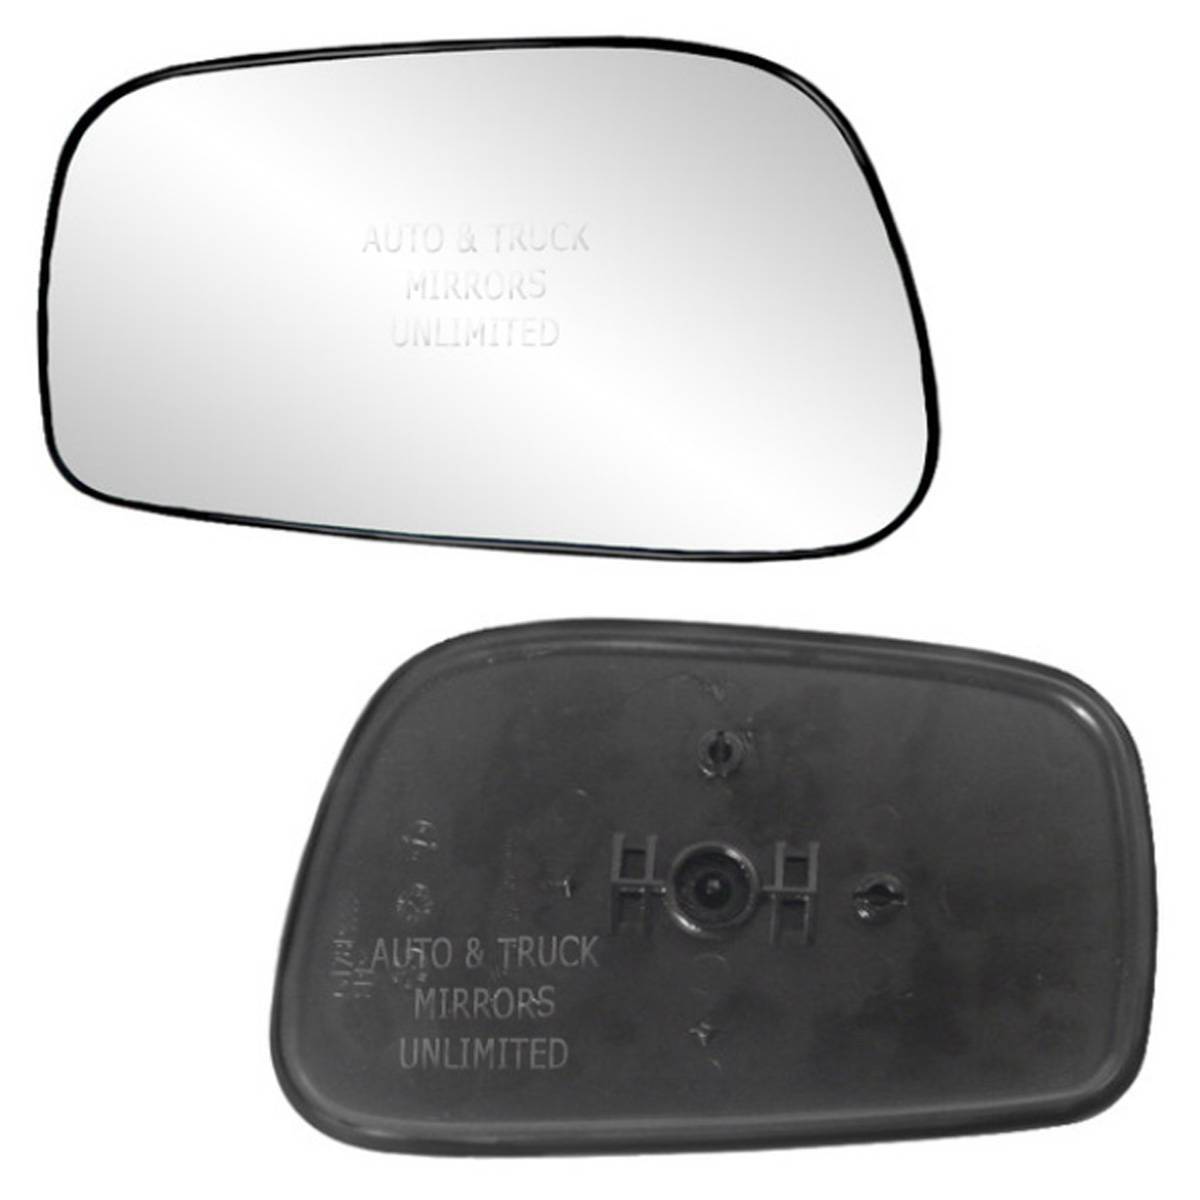 NEW Mirror Glass WITH BACKING for TOYOTA 03-08 COROLLA MATRIX Driver Left Side